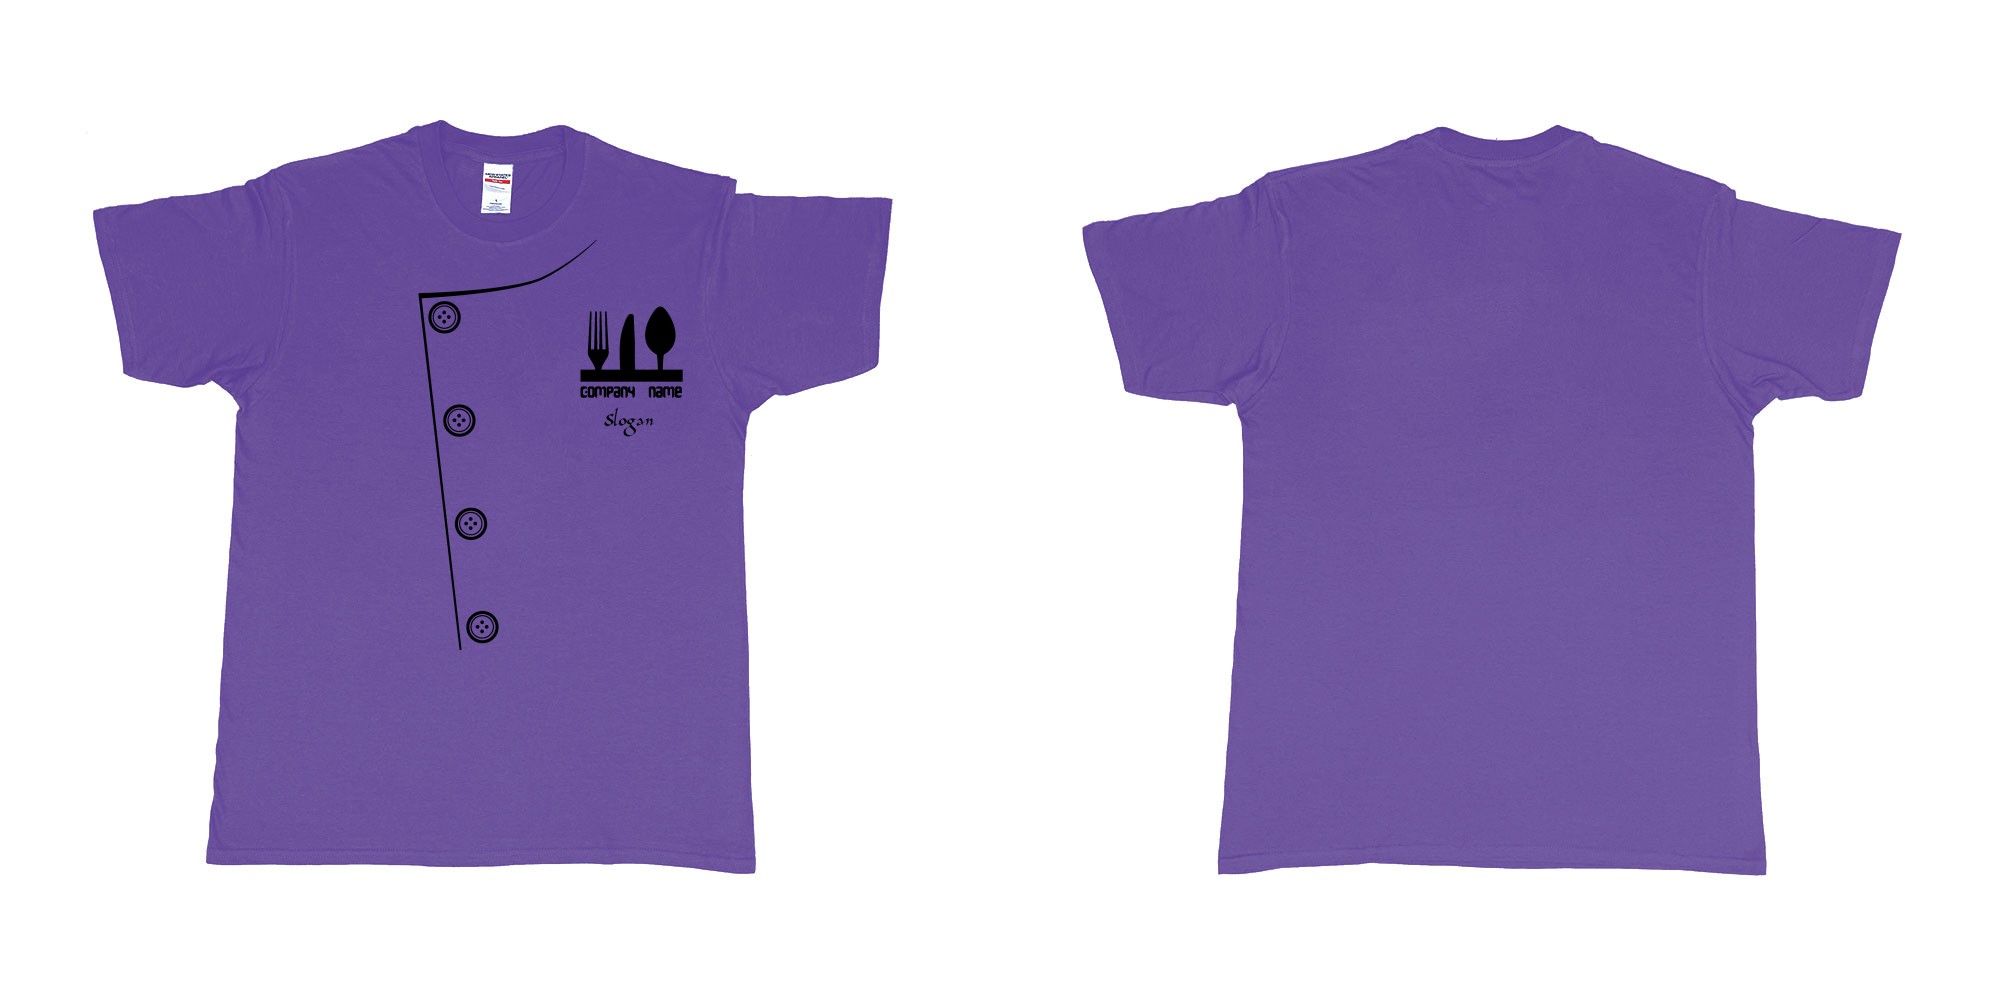 Custom tshirt design chef uniform with fork knife and spoon in fabric color purple choice your own text made in Bali by The Pirate Way